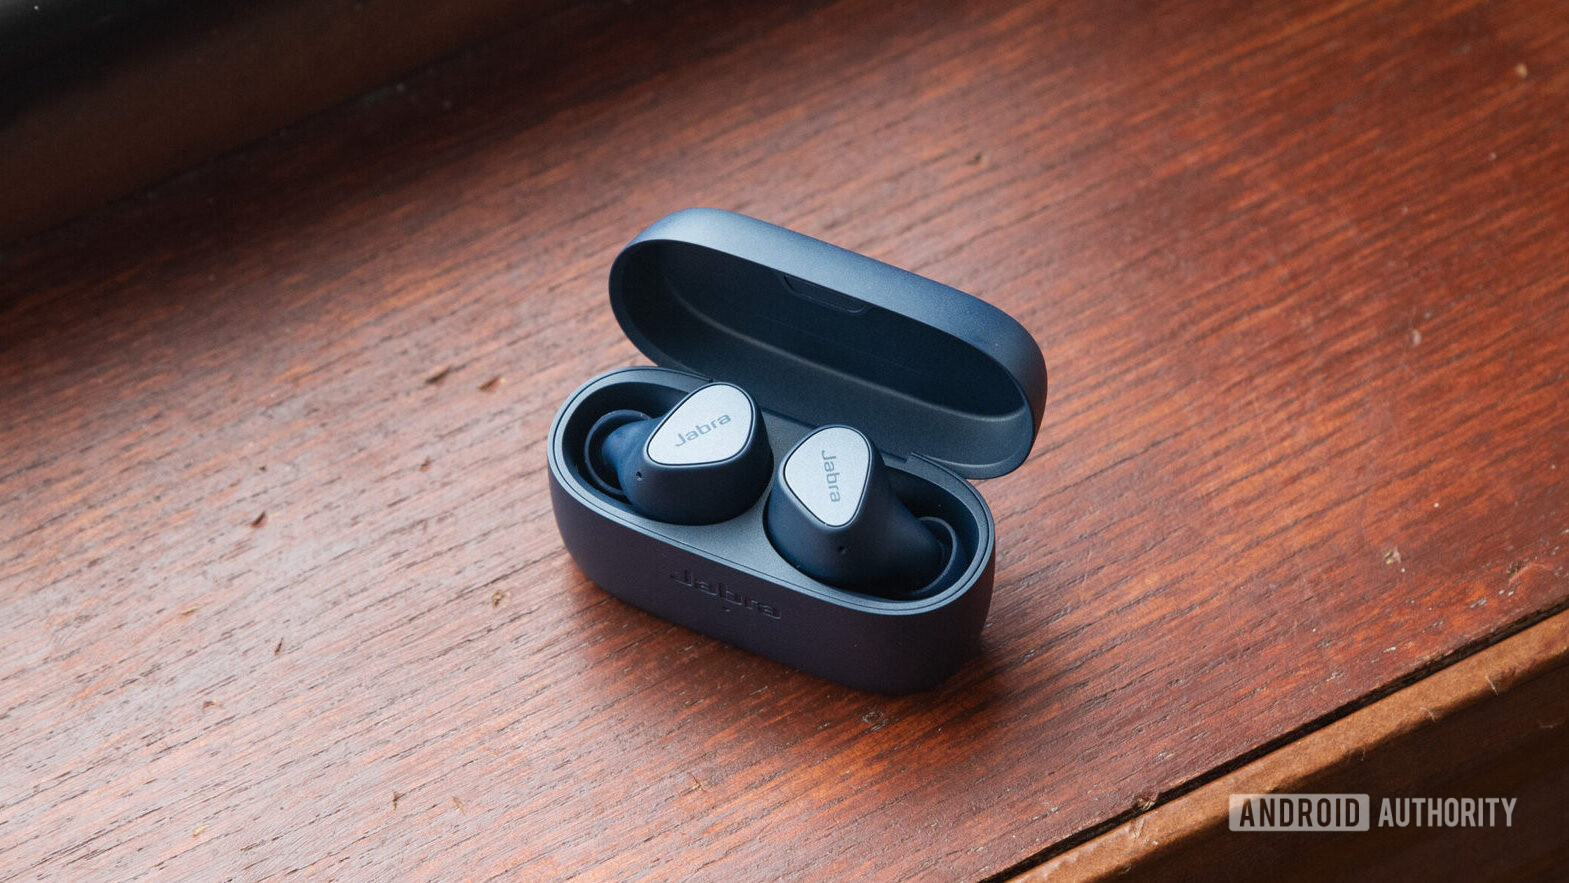 The Jabra Elite 4 wireless noise-cancelling earbuds in the open case on a wooden surface.